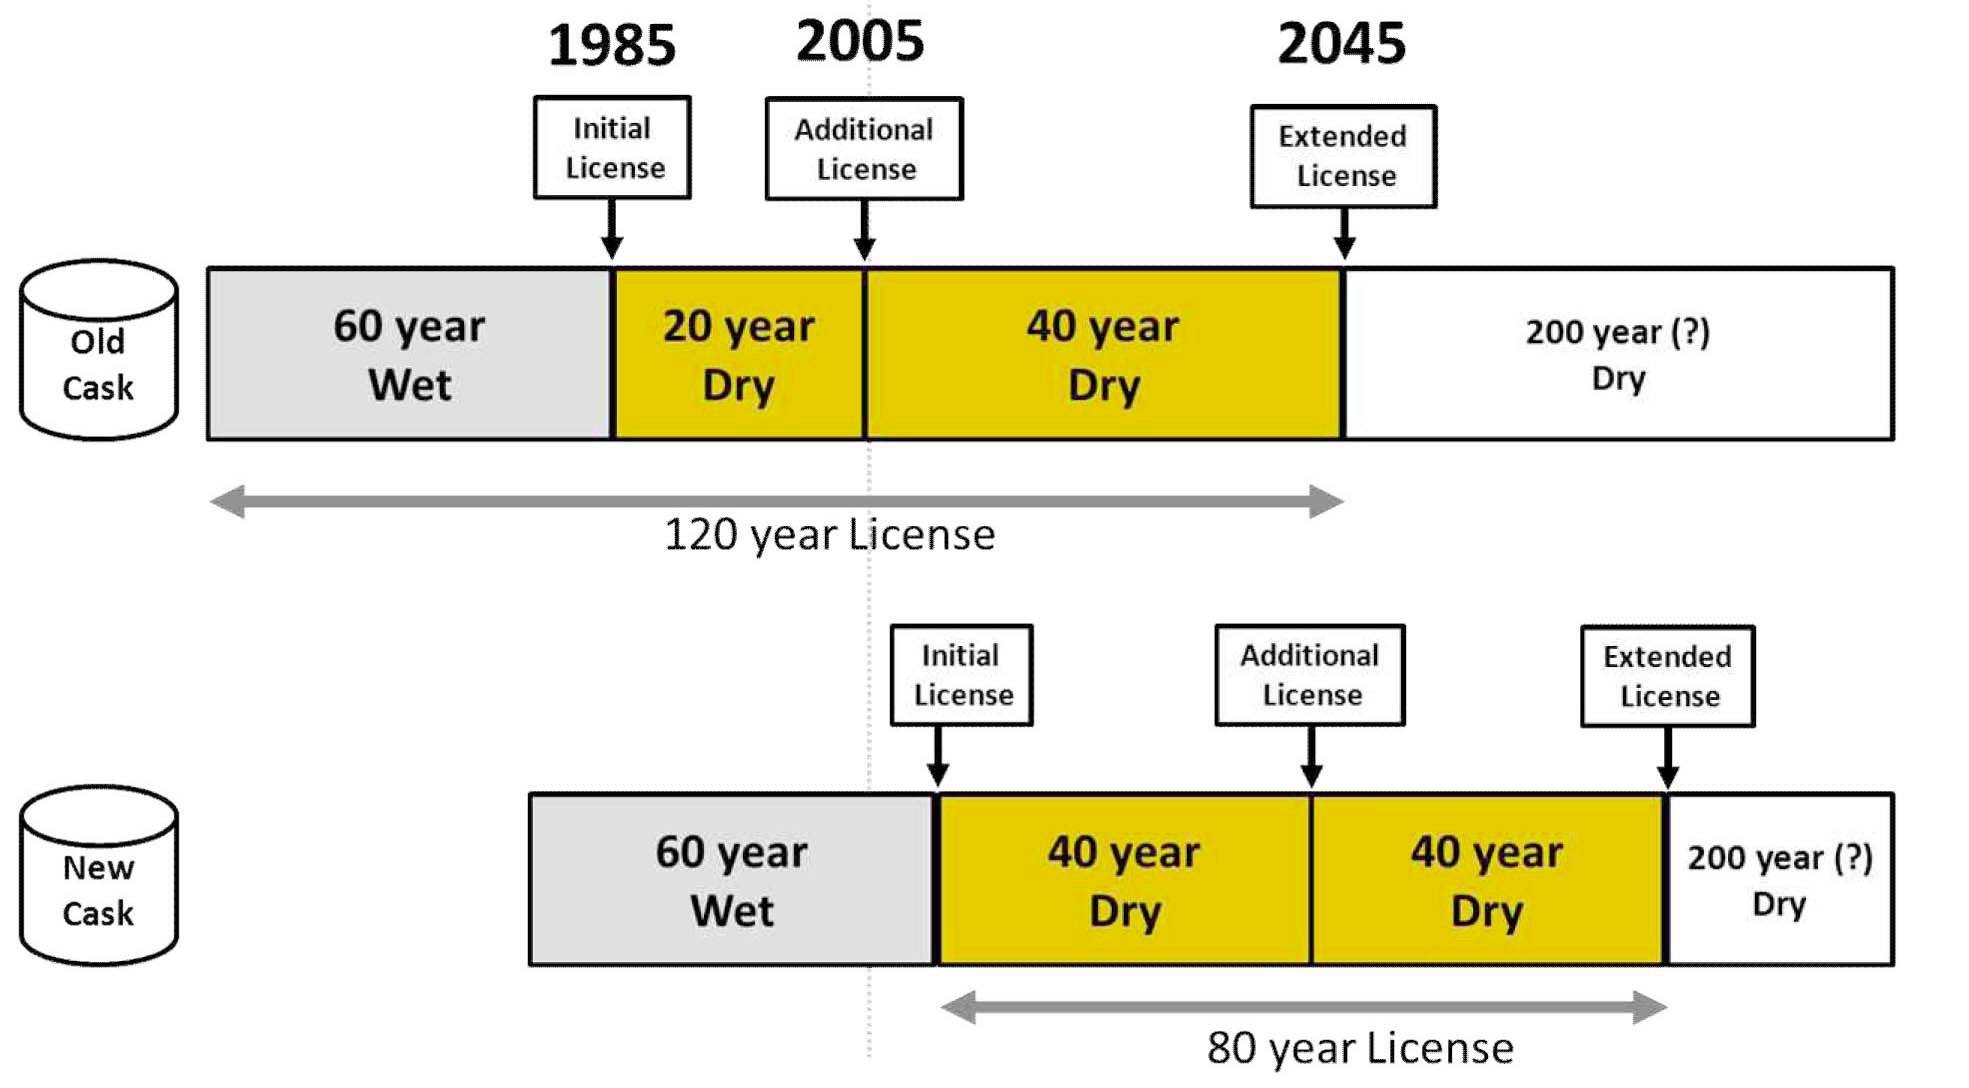 Historical License Changes of Dry Storage in the USA.